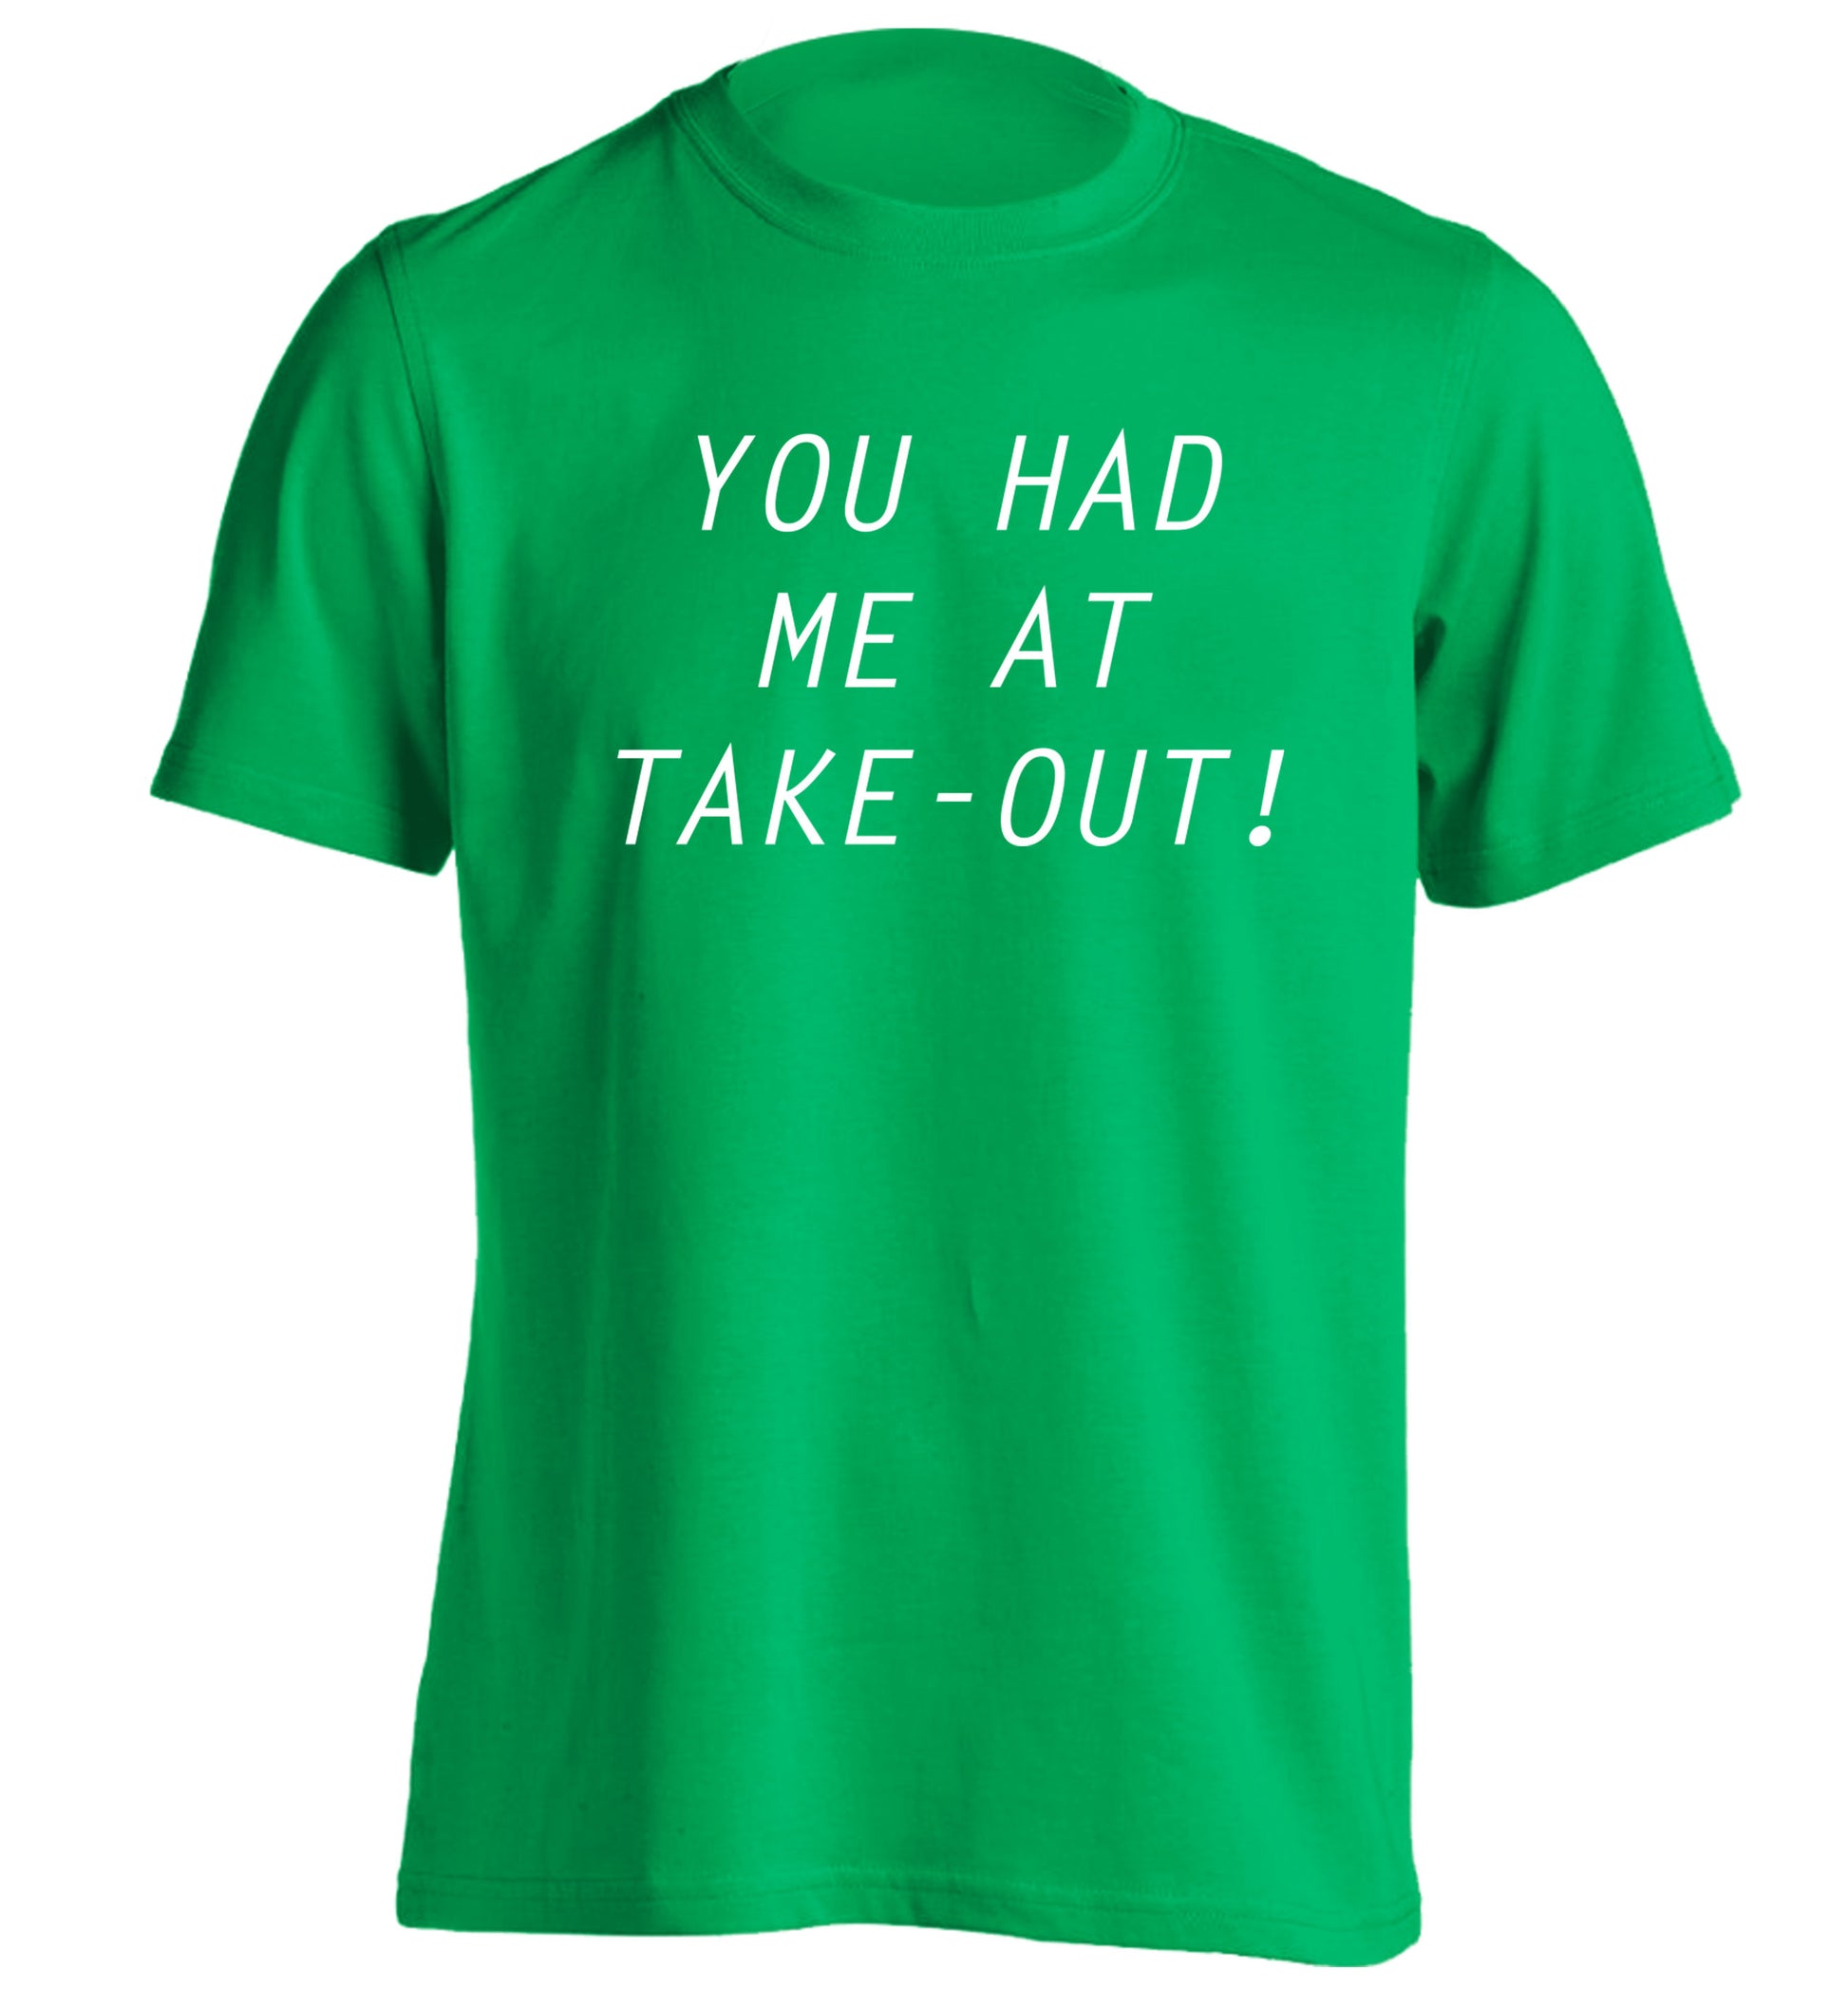 You had me at take-out adults unisex green Tshirt 2XL